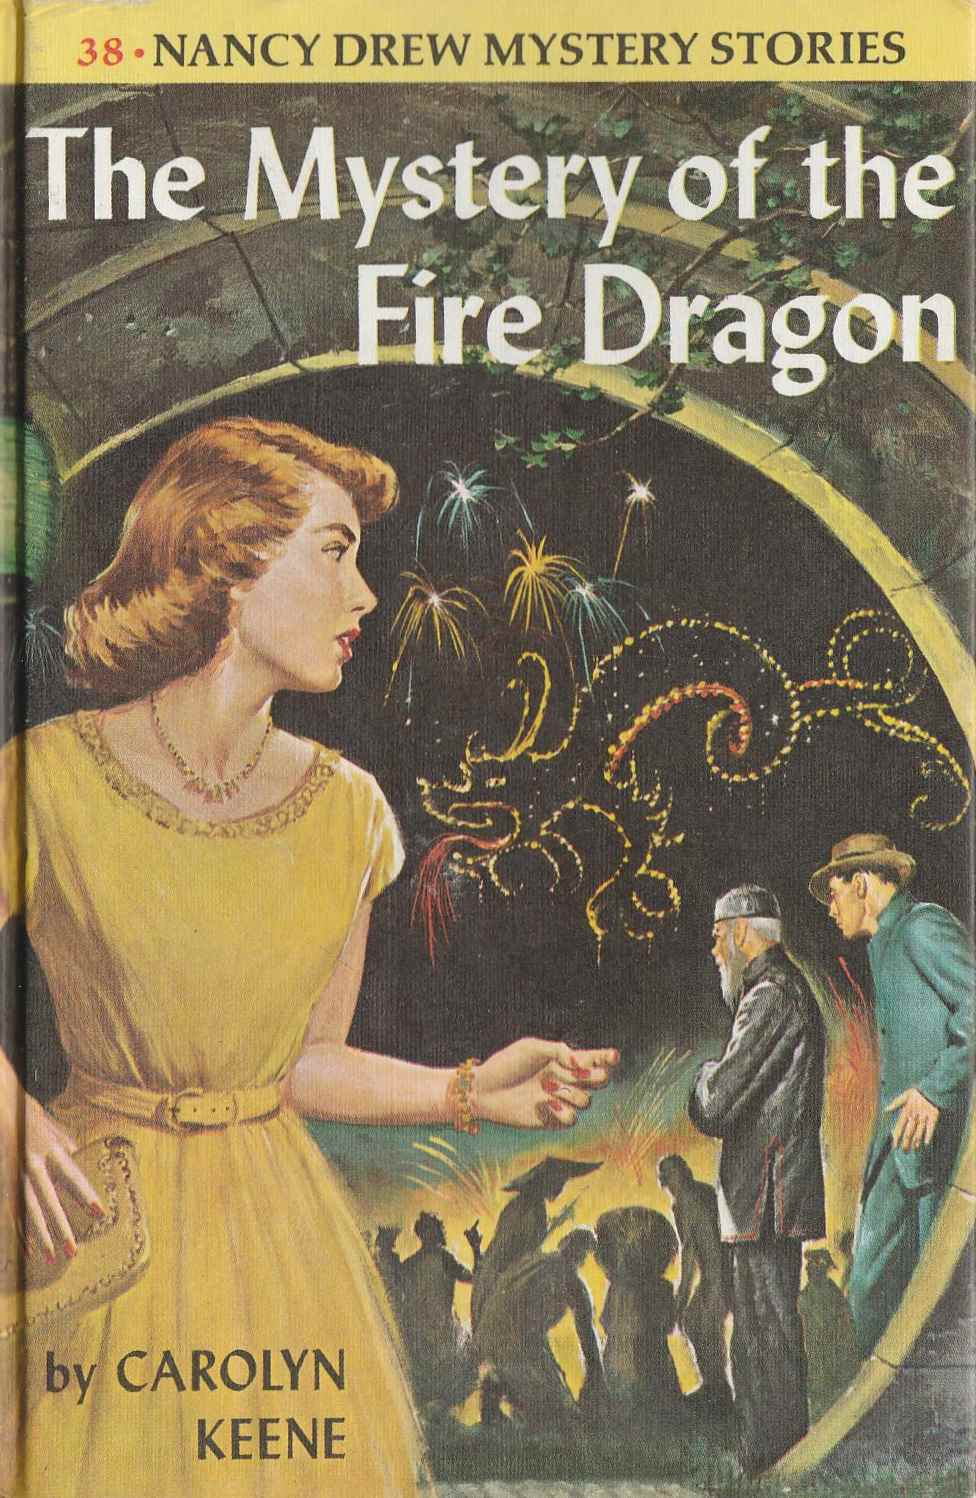 The Mystery of the Fire Dragon